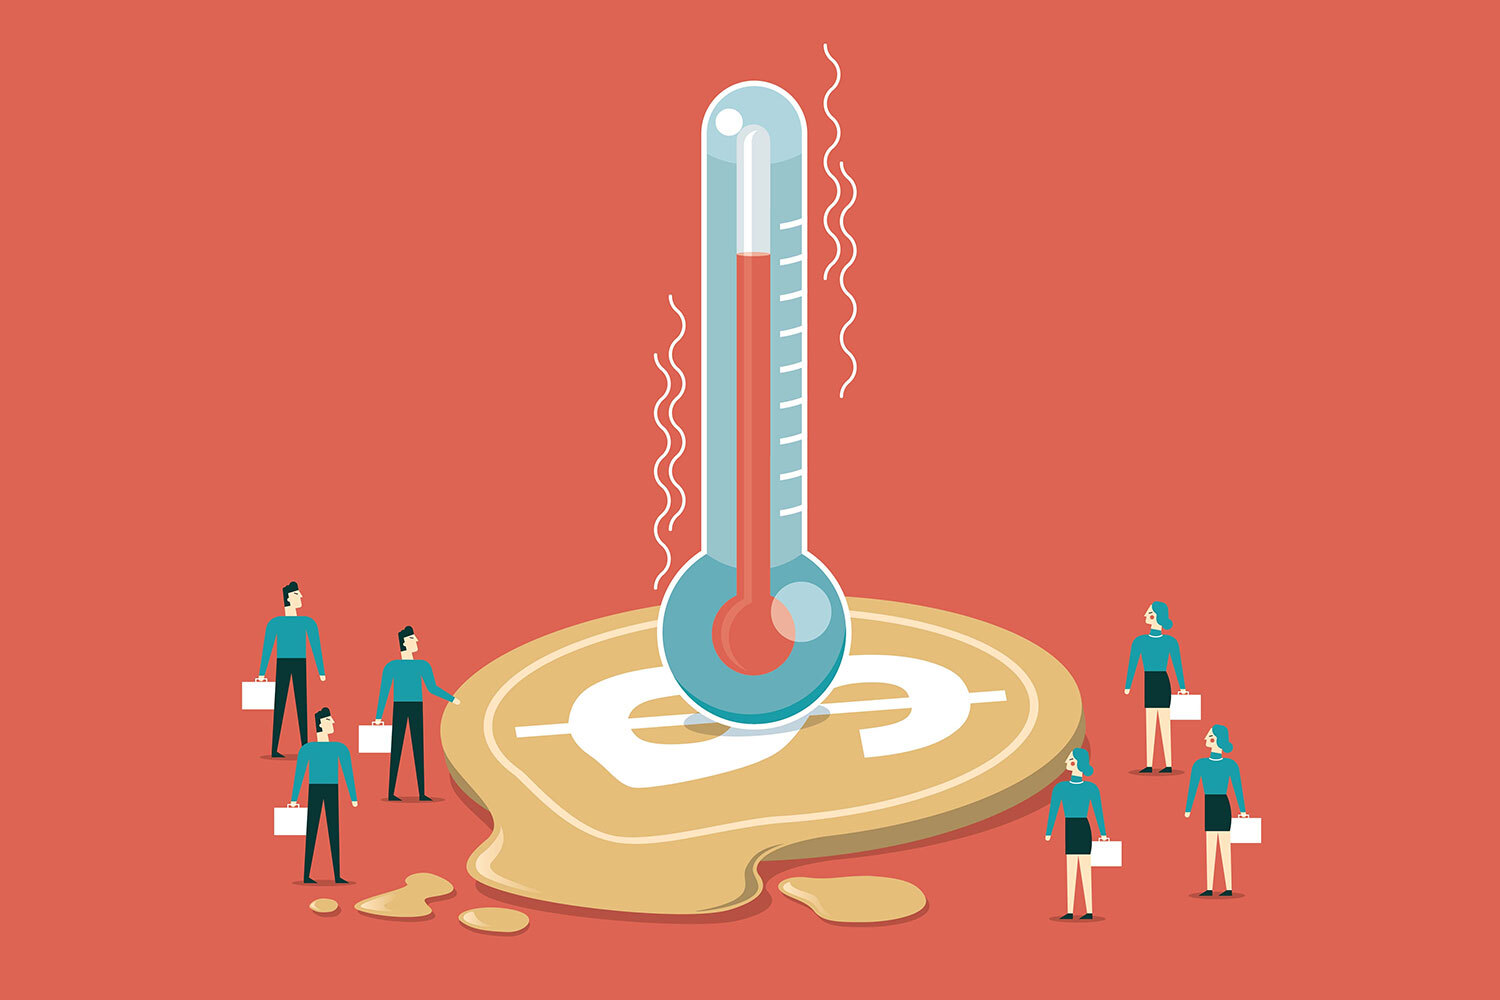 An illustration of people holding briefcases standing around a thermometer depicting climate change